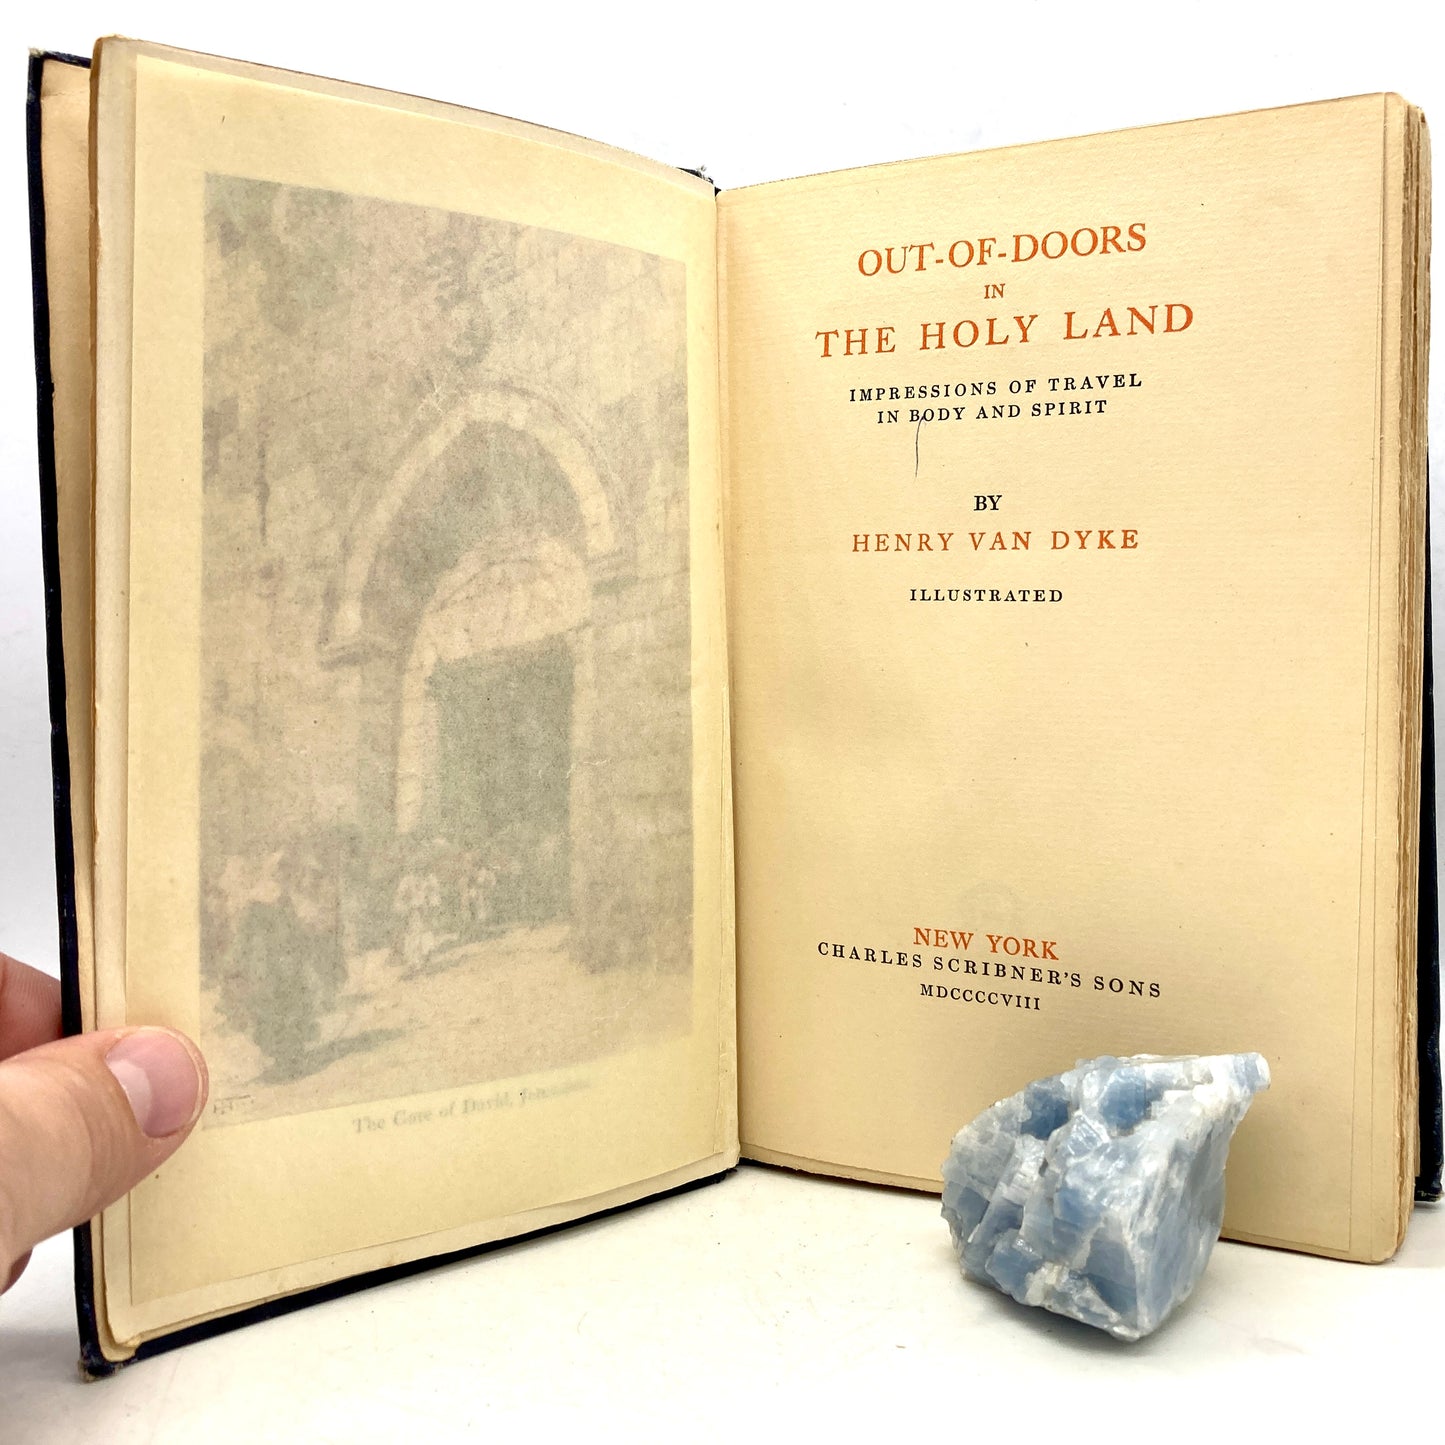 VAN DYKE, Henry "Out-of-Doors in the Holy Land" [Scribners, 1908] Margaret Armstrong